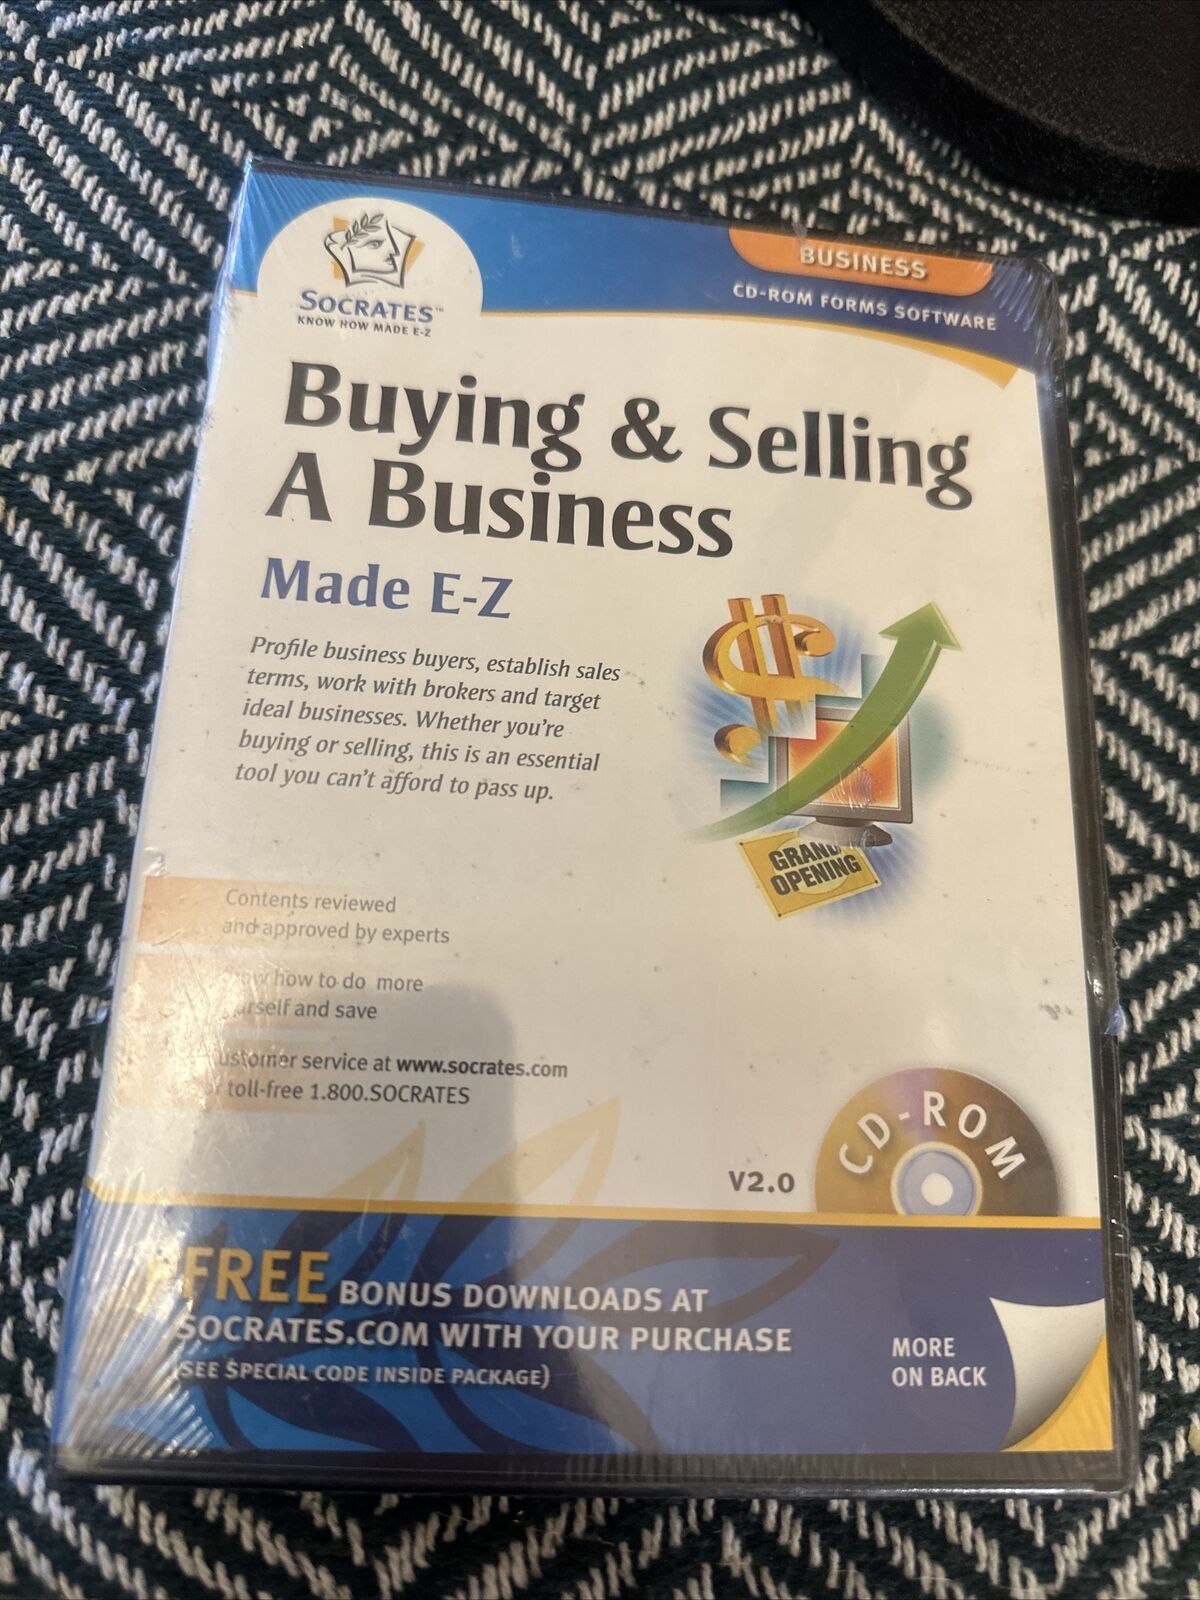 Socrates - Buying & Selling A Business Made E-Z V2.0 (CDRom 2004) Brand New